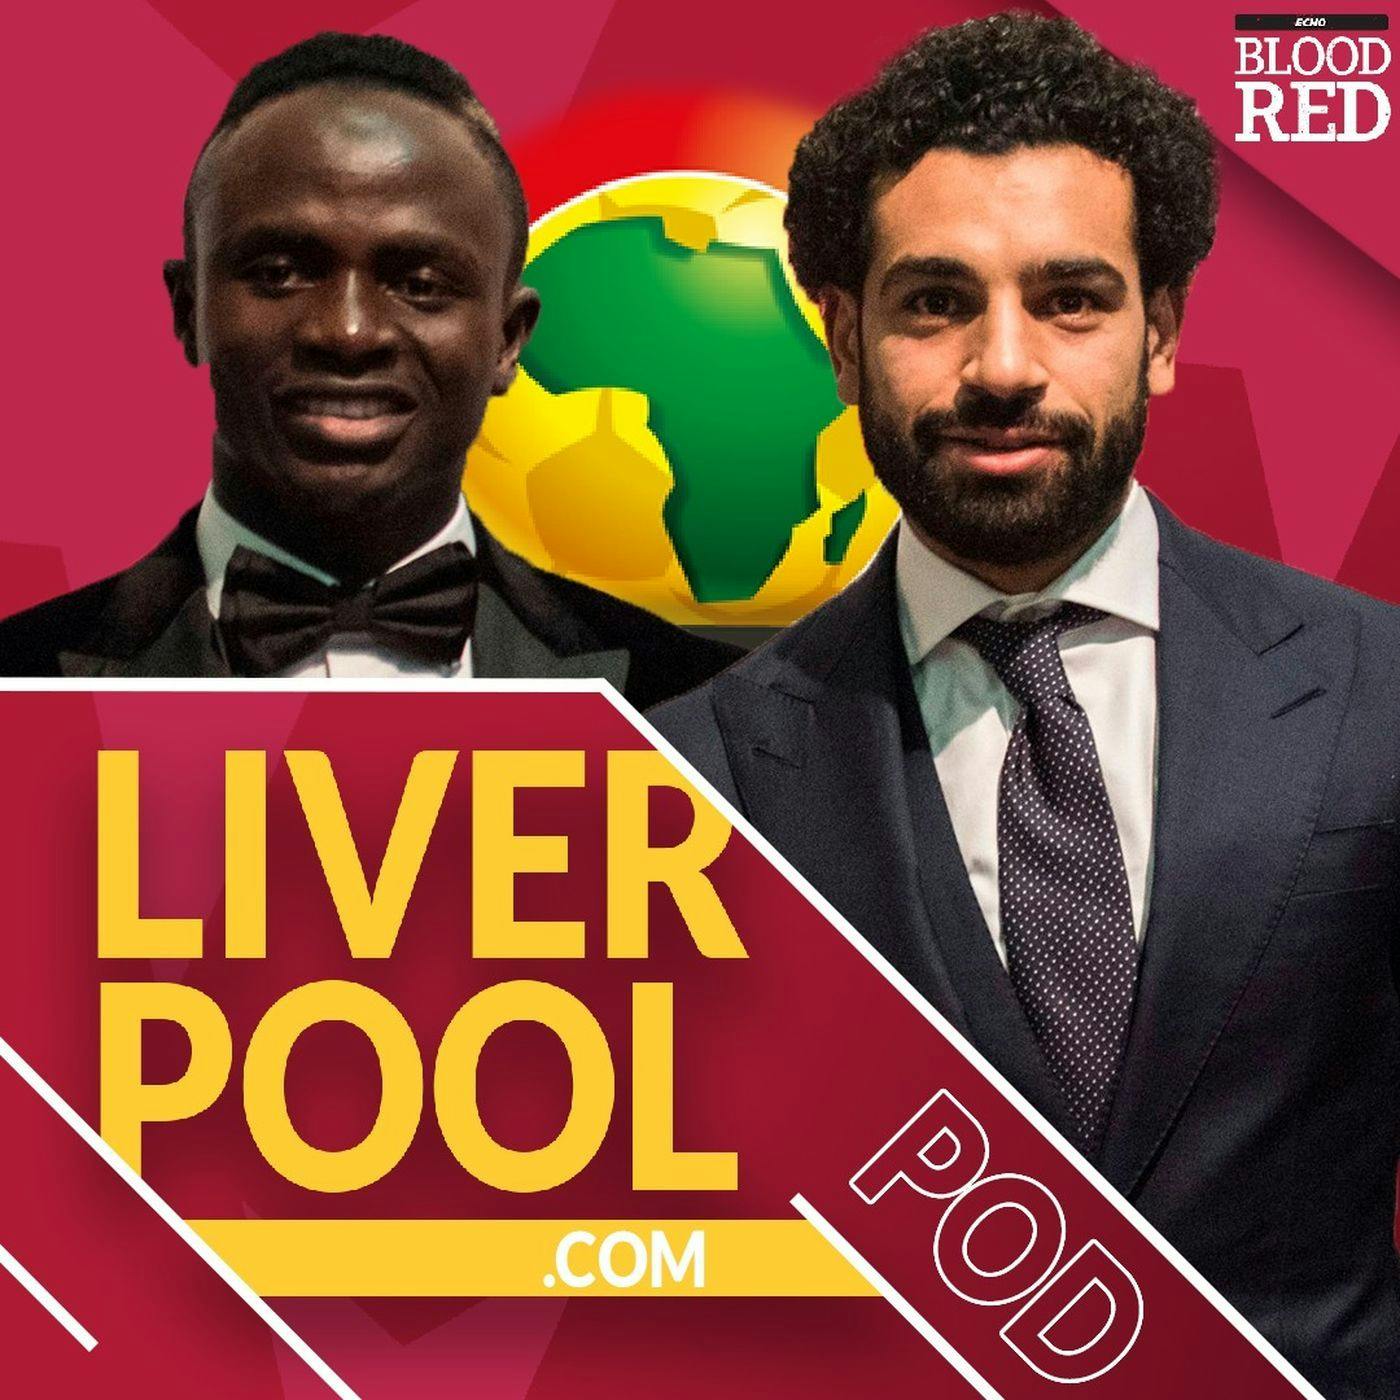 Liverpool.com Podcast: Jurgen Klopp faces selection dilemma as AFCON, Carabao Cup and more loom